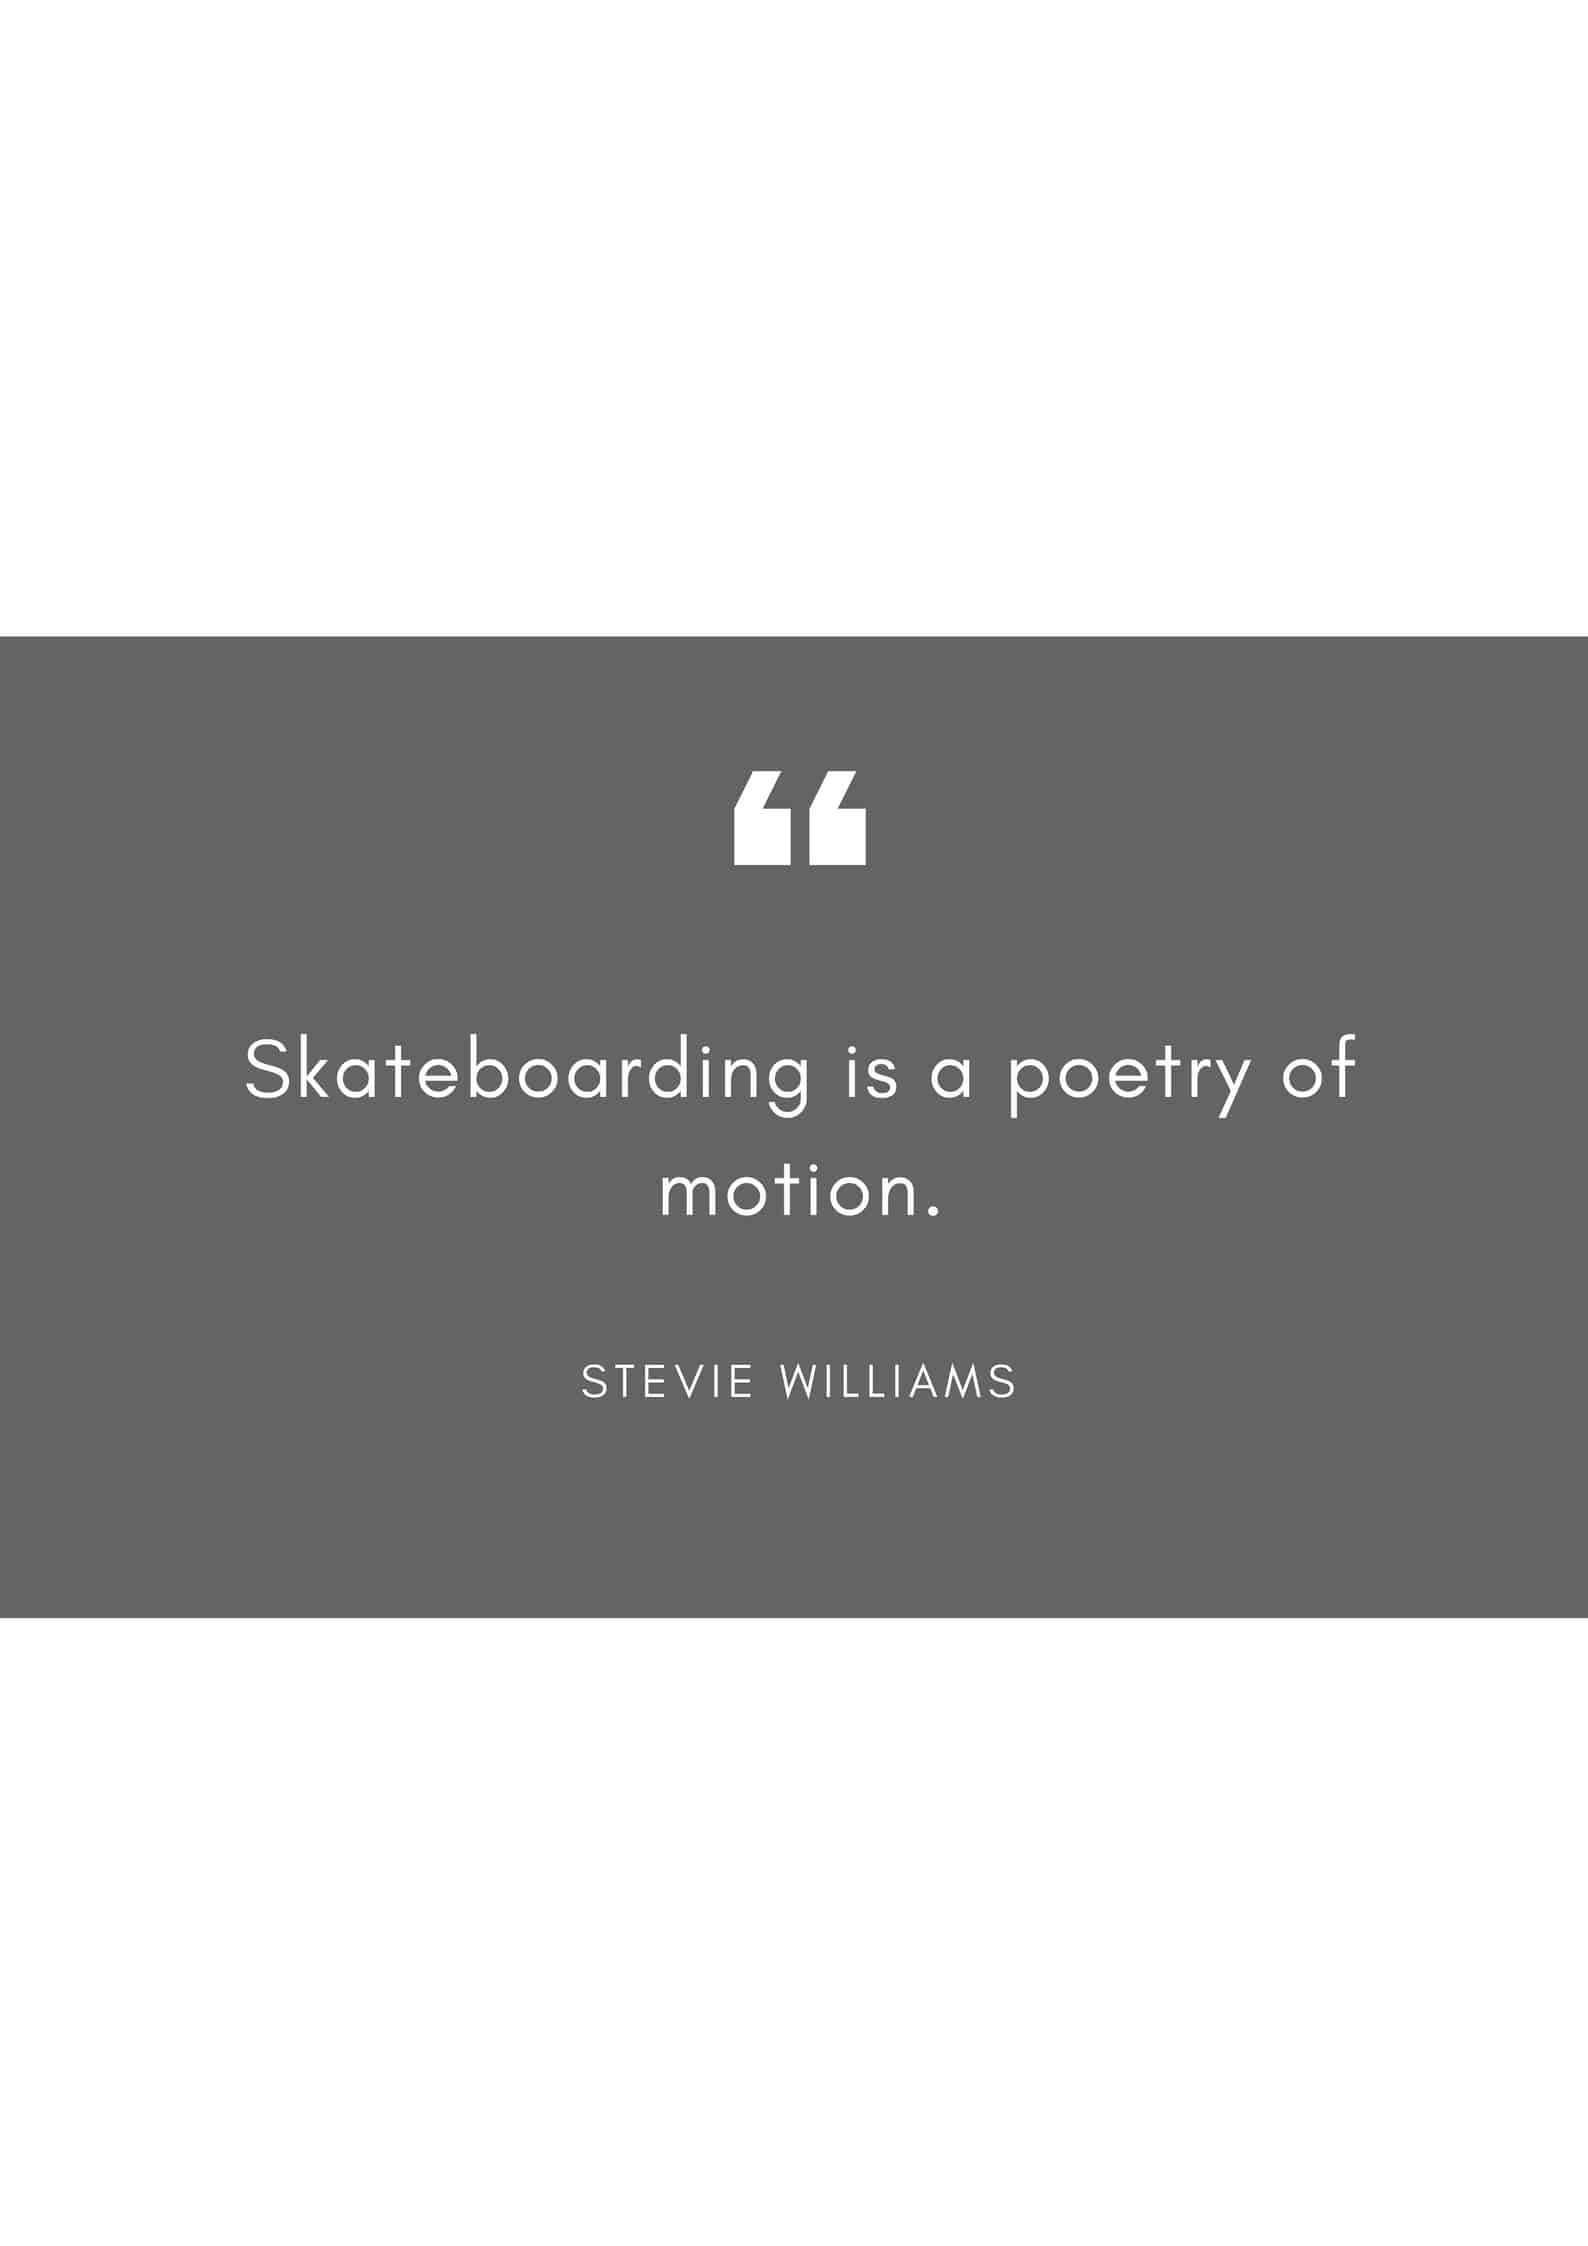 Skateboarding is a poetry of motion.